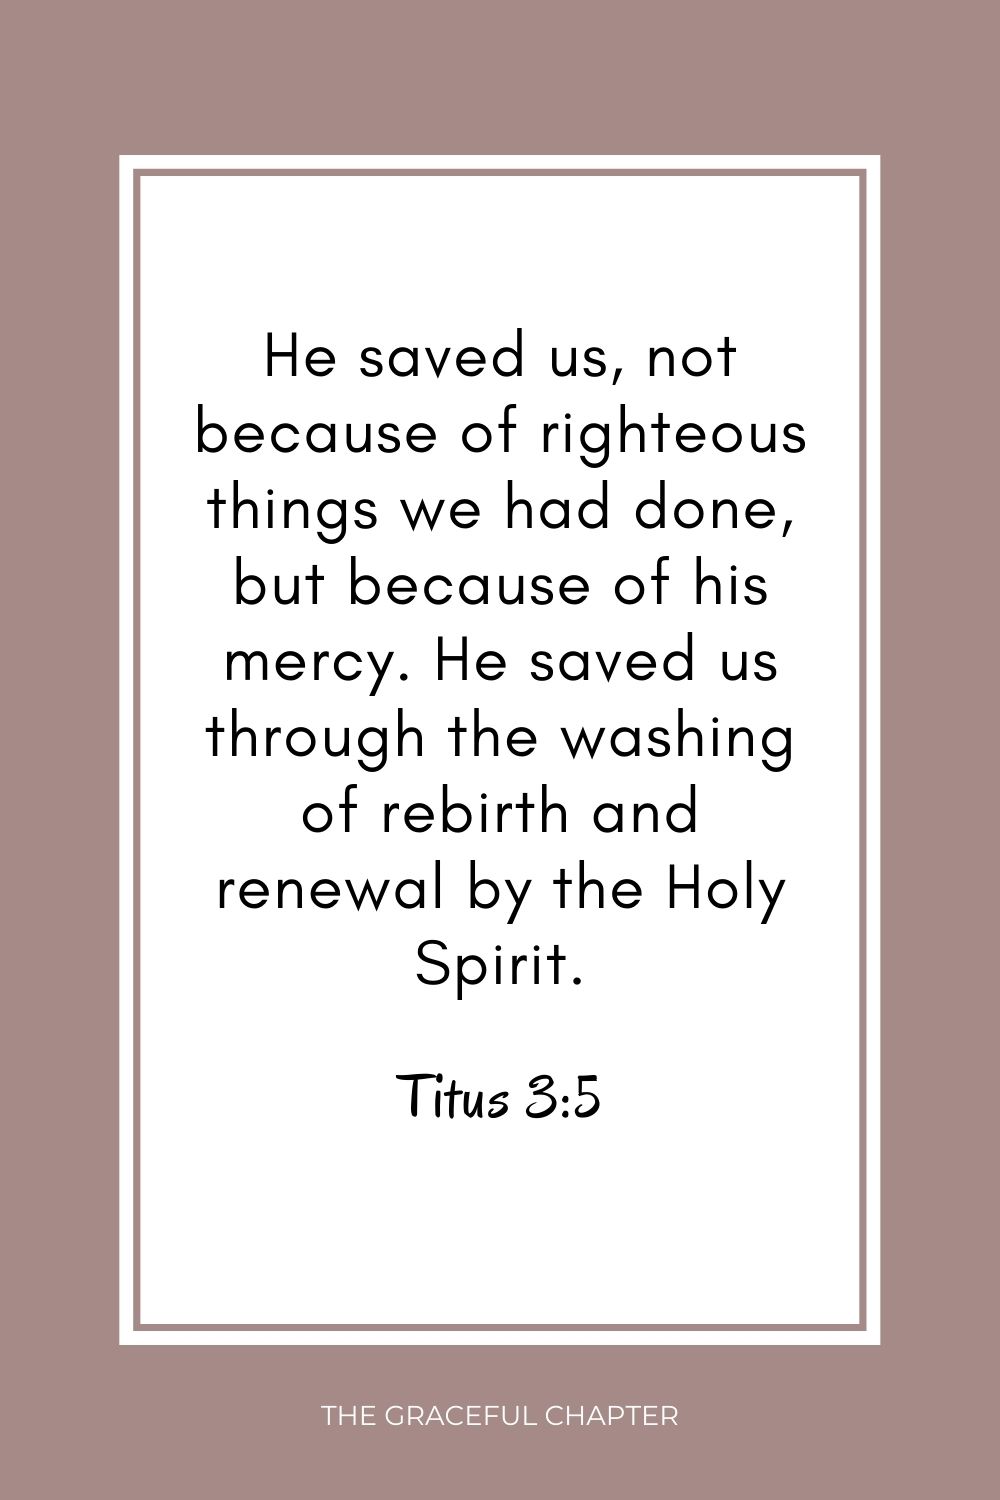 He saved us, not because of righteous things we had done, but because of his mercy. He saved us through the washing of rebirth and renewal by the Holy Spirit. Titus 3:5